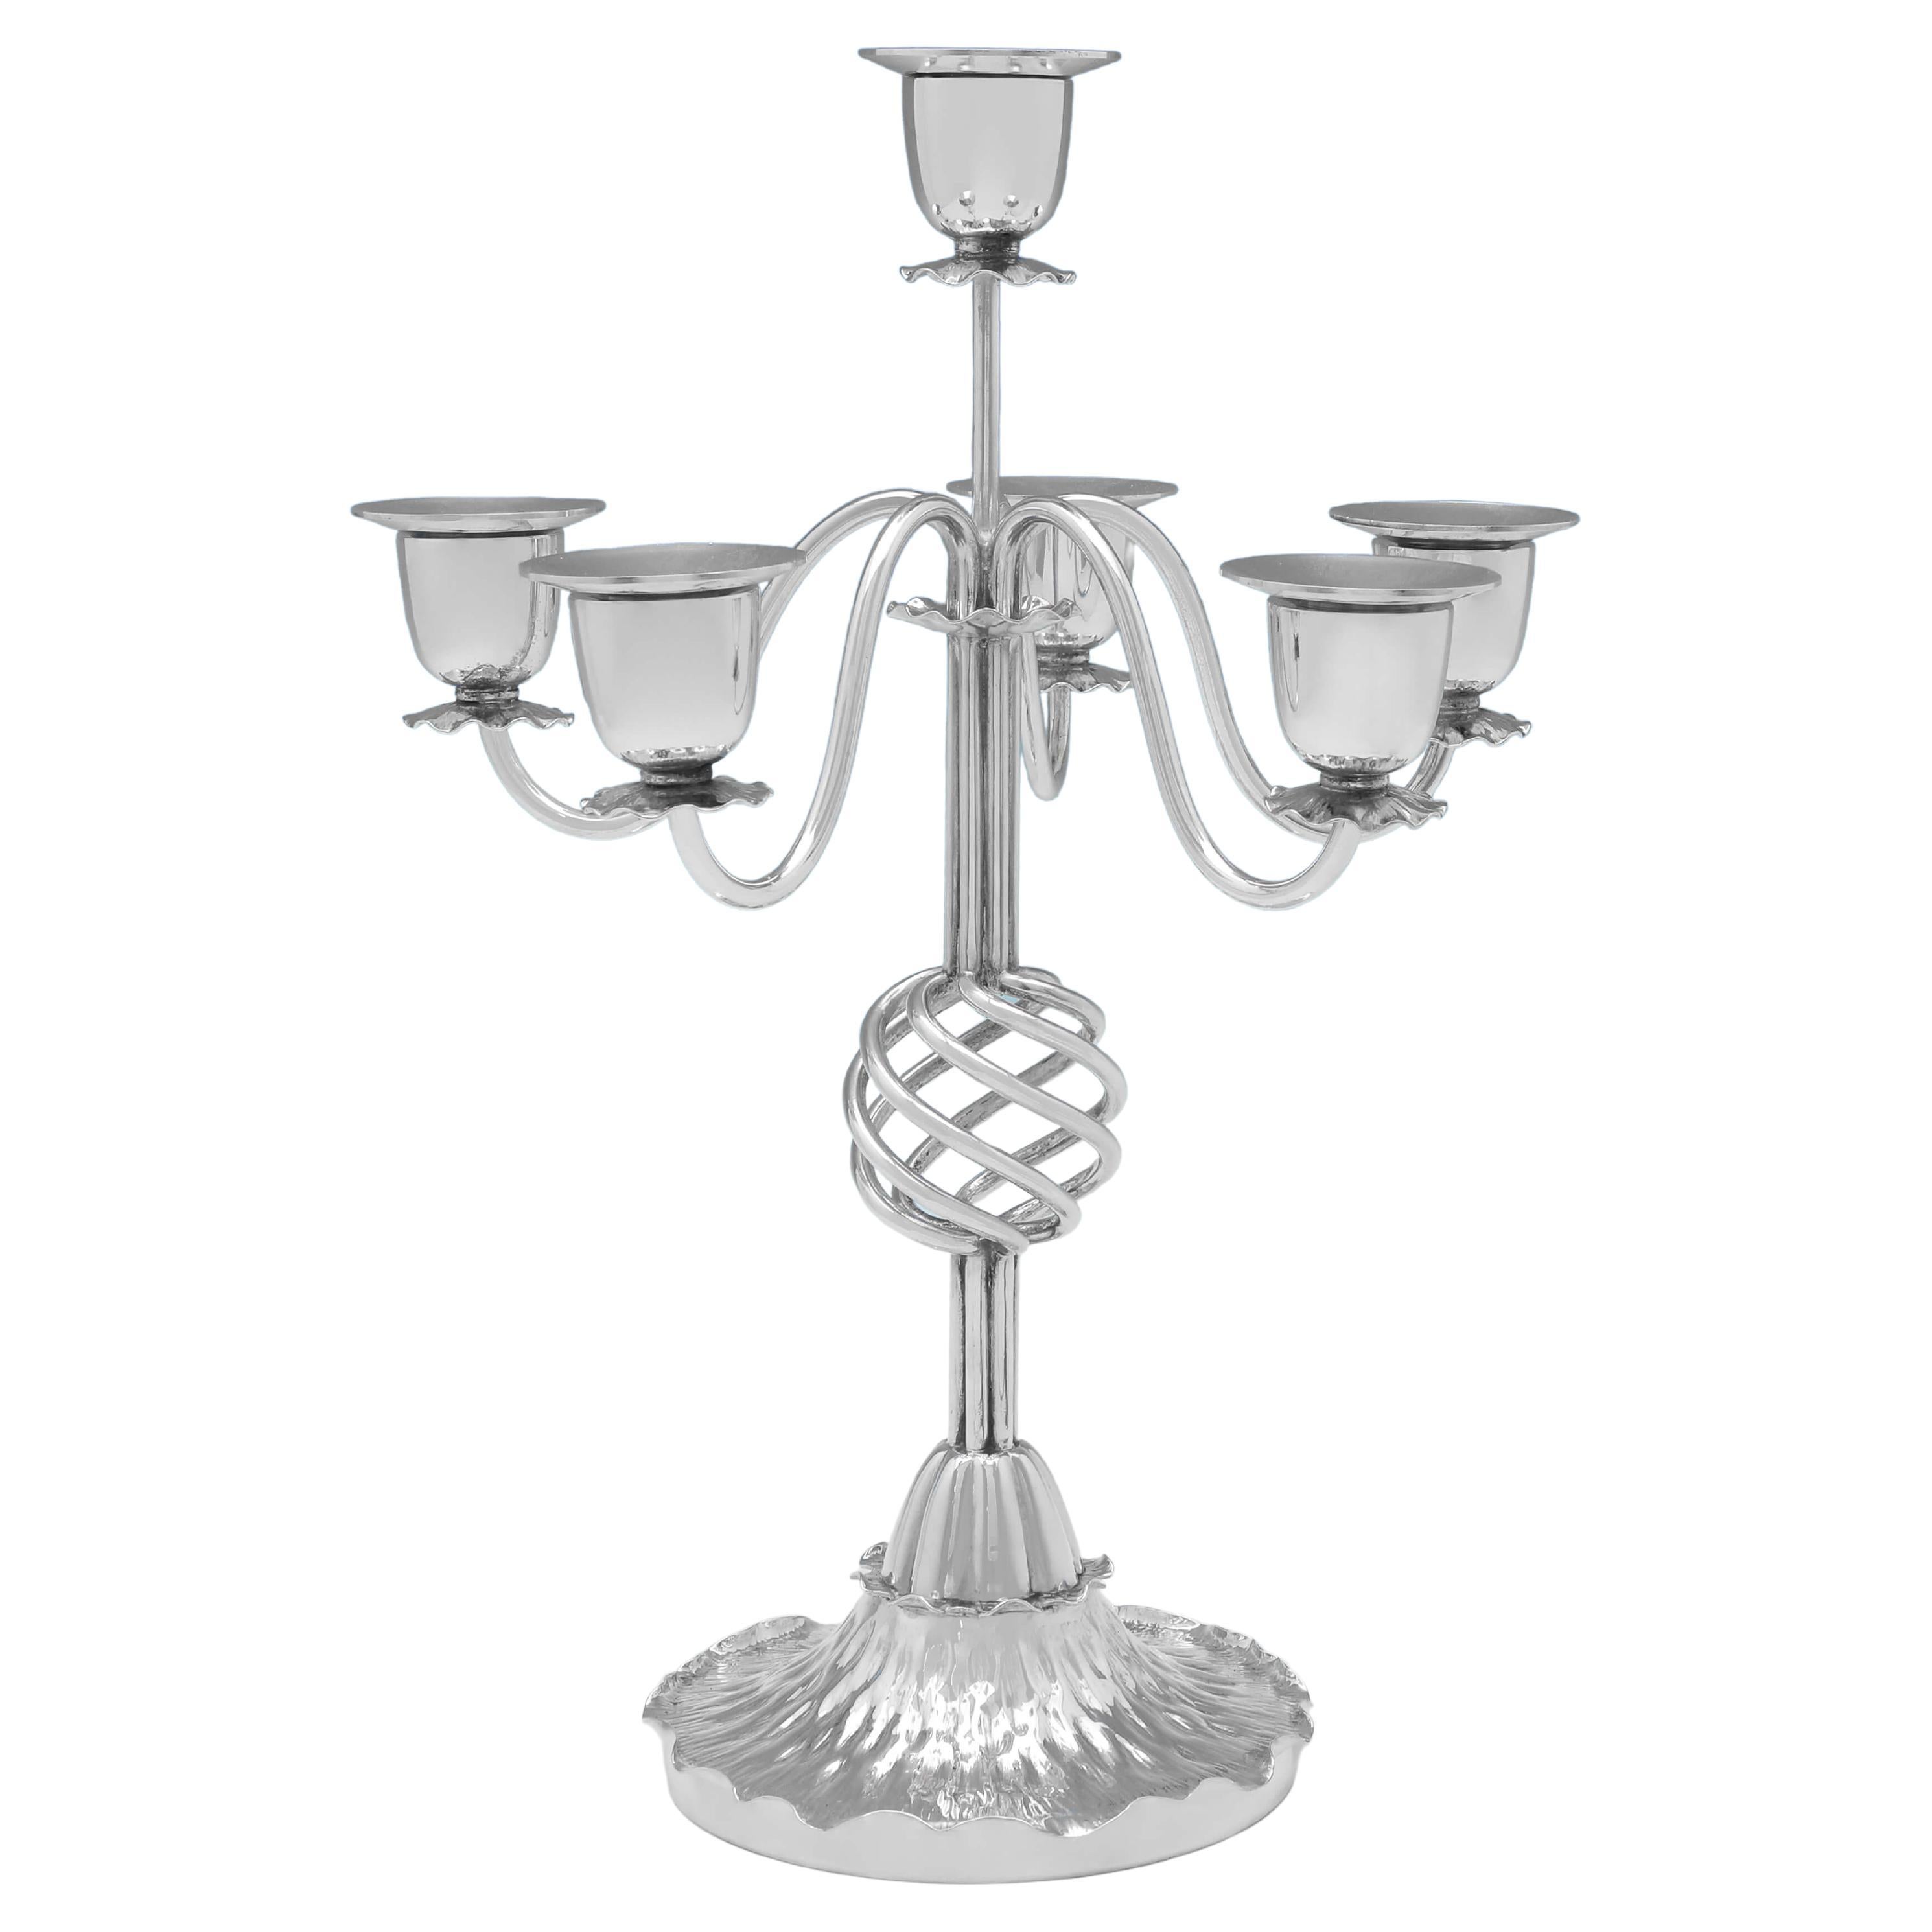 Aesthetic Period Antique Silver Plate Candelabrum by Hukin & Heath, Circa 1880